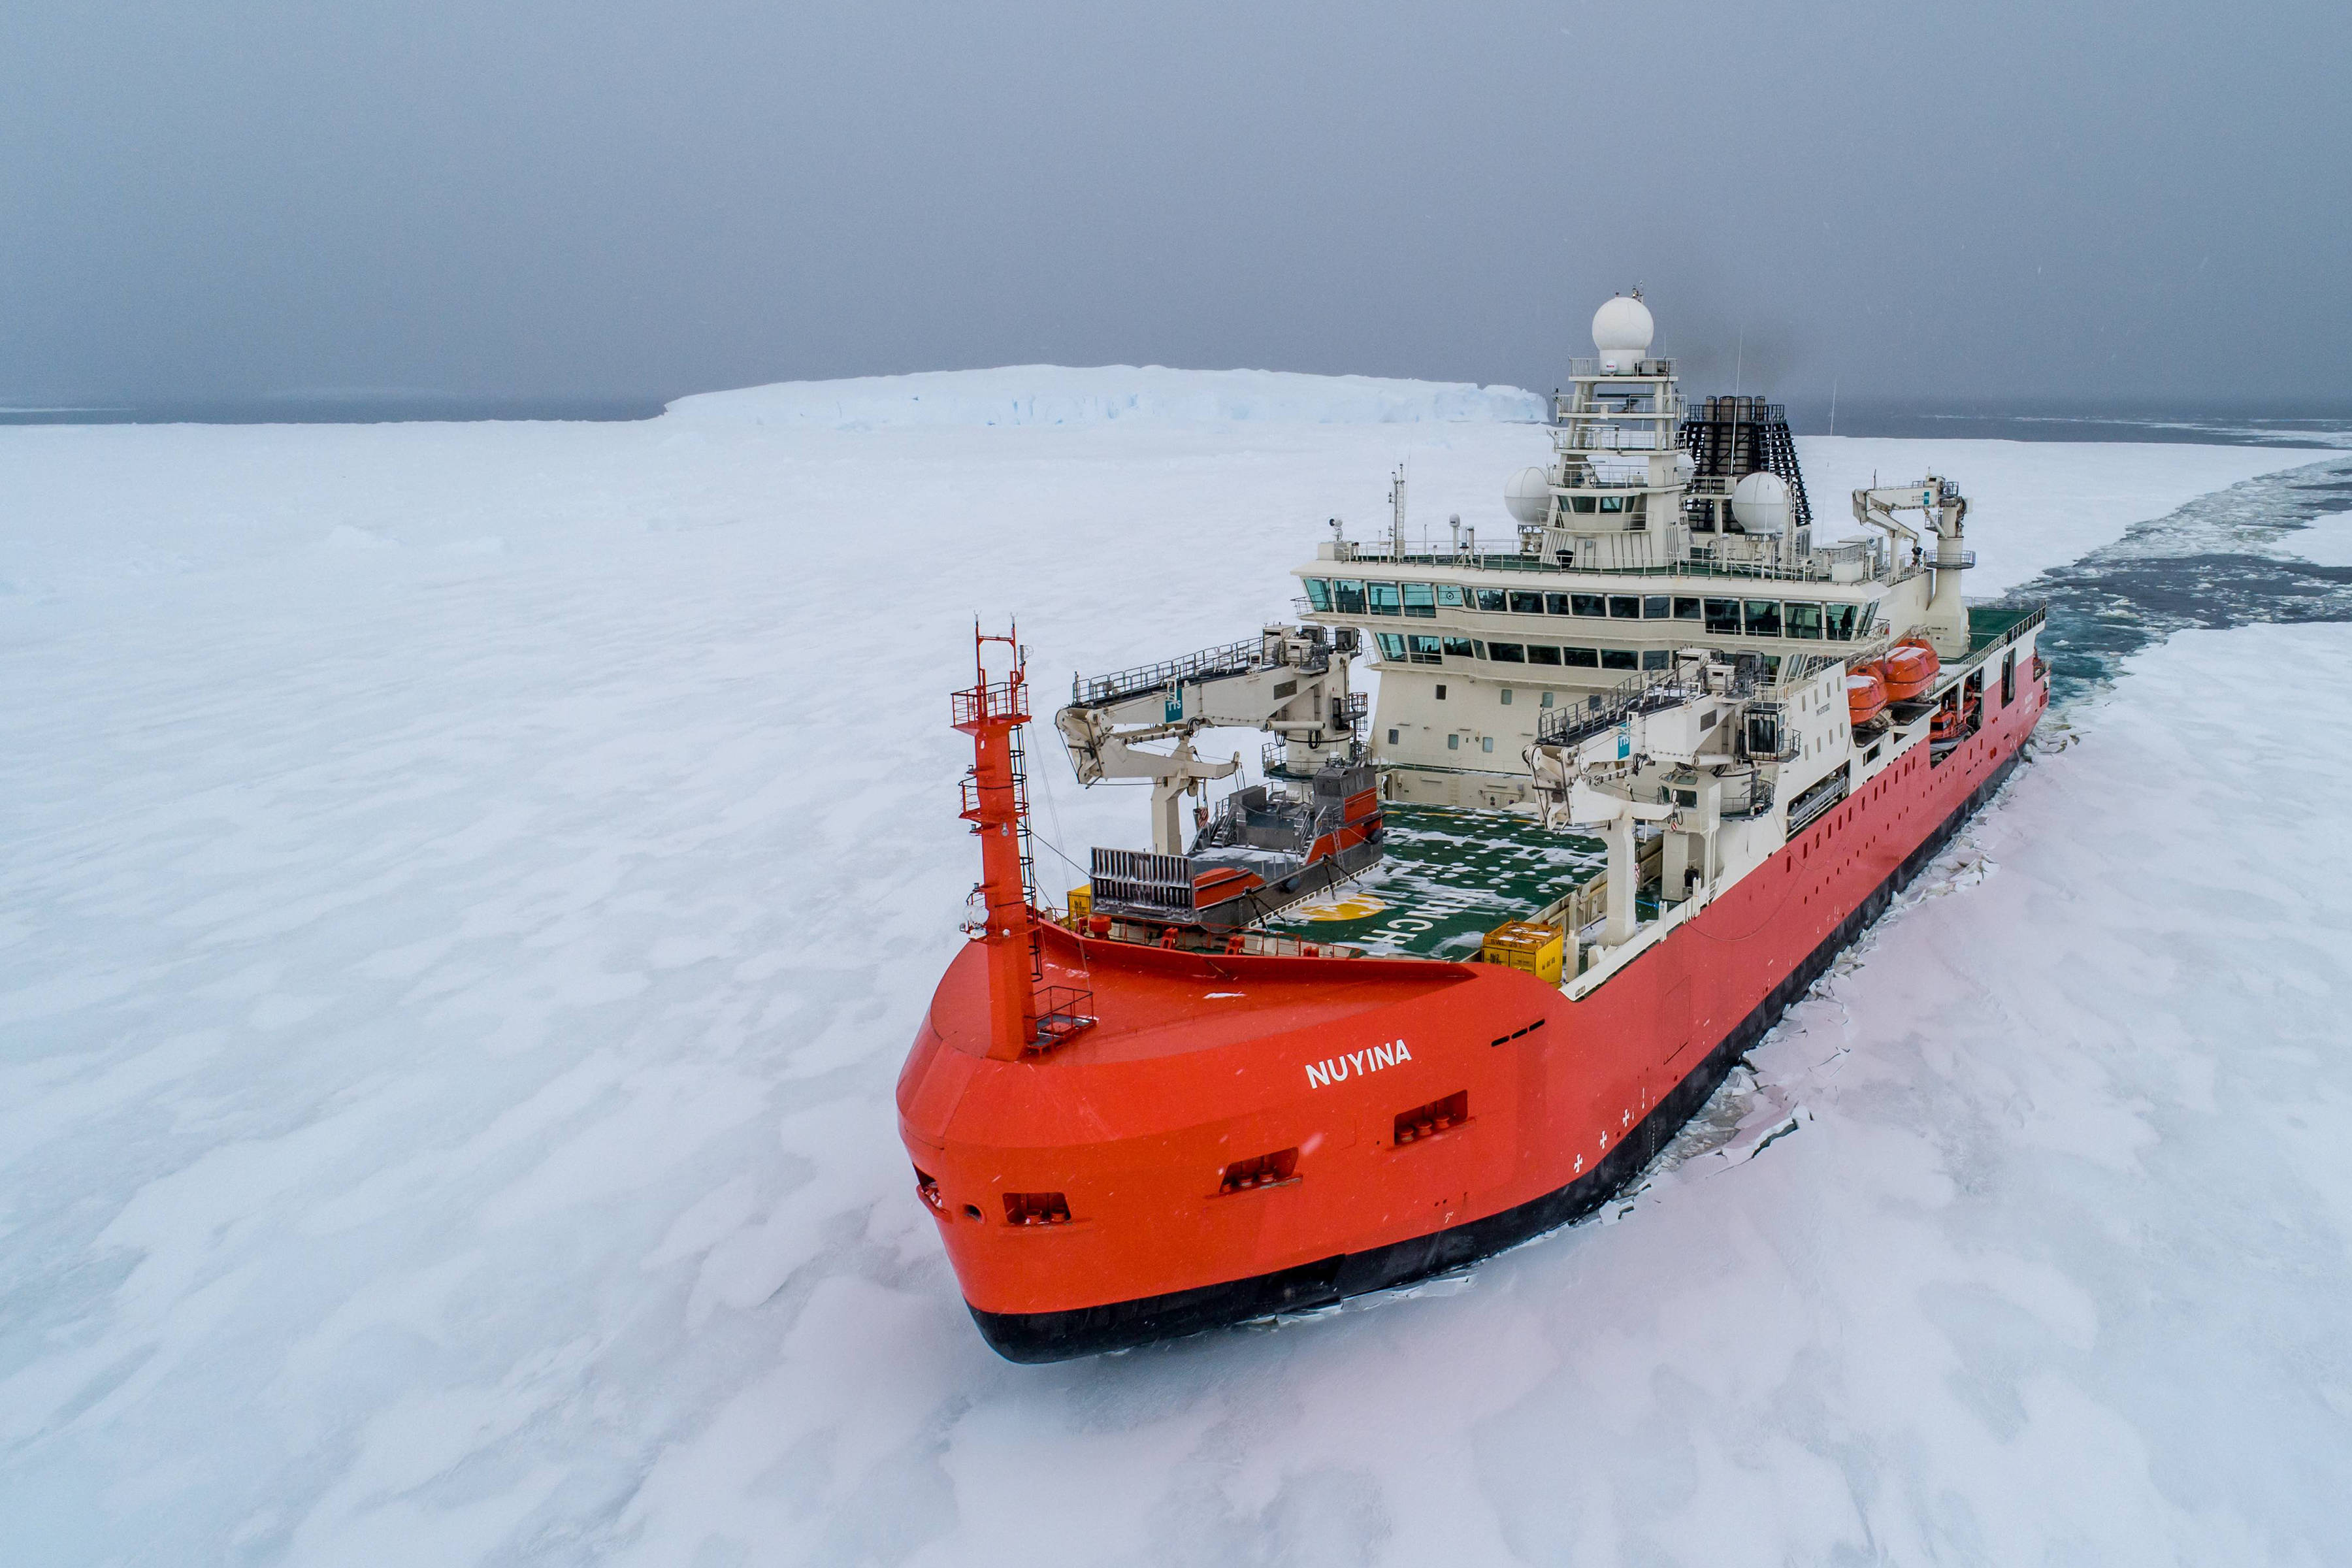 Ship RSV Nuyina in icy waters. Photo: Pete Harmsen / AAD.